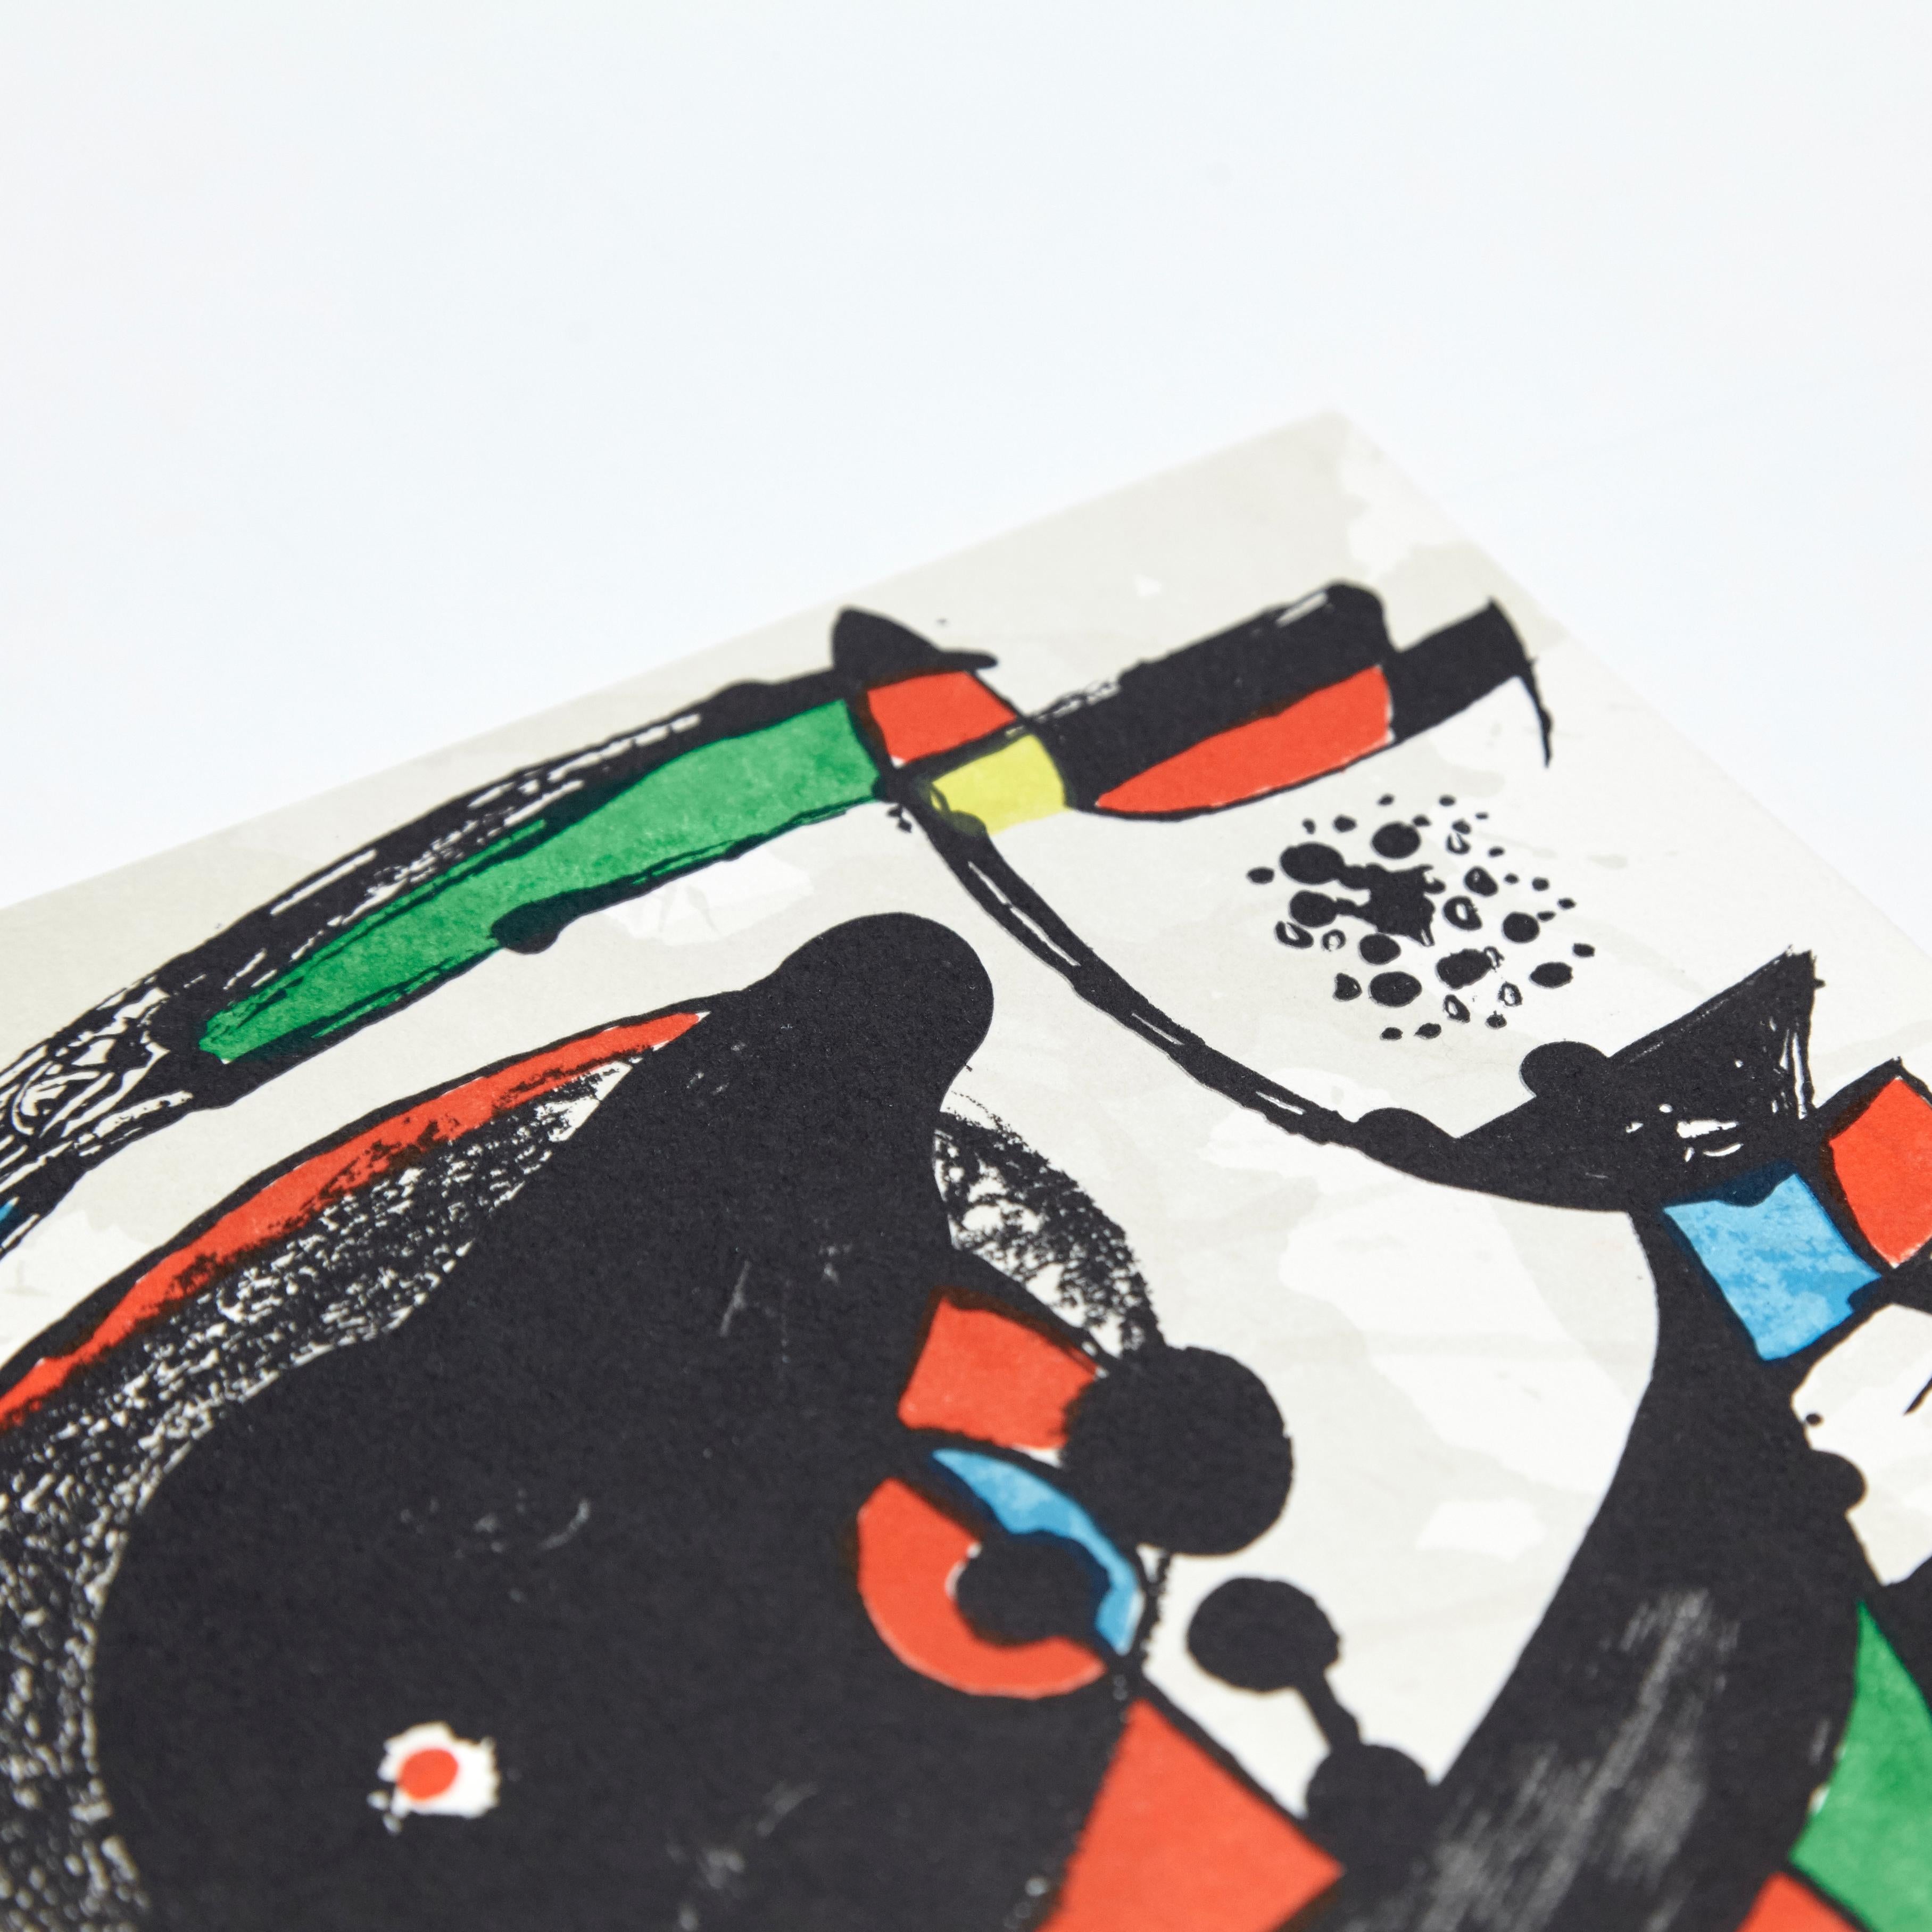 Lithograph on Guarro paper
Edition of 1.500
Signed by Joan Miró on the plate


This lithography by Joan Miró, dated 1974, features Jacques Dupin Mirós text “Miró scultore” a testimony in itself of the close collaboration established throughout